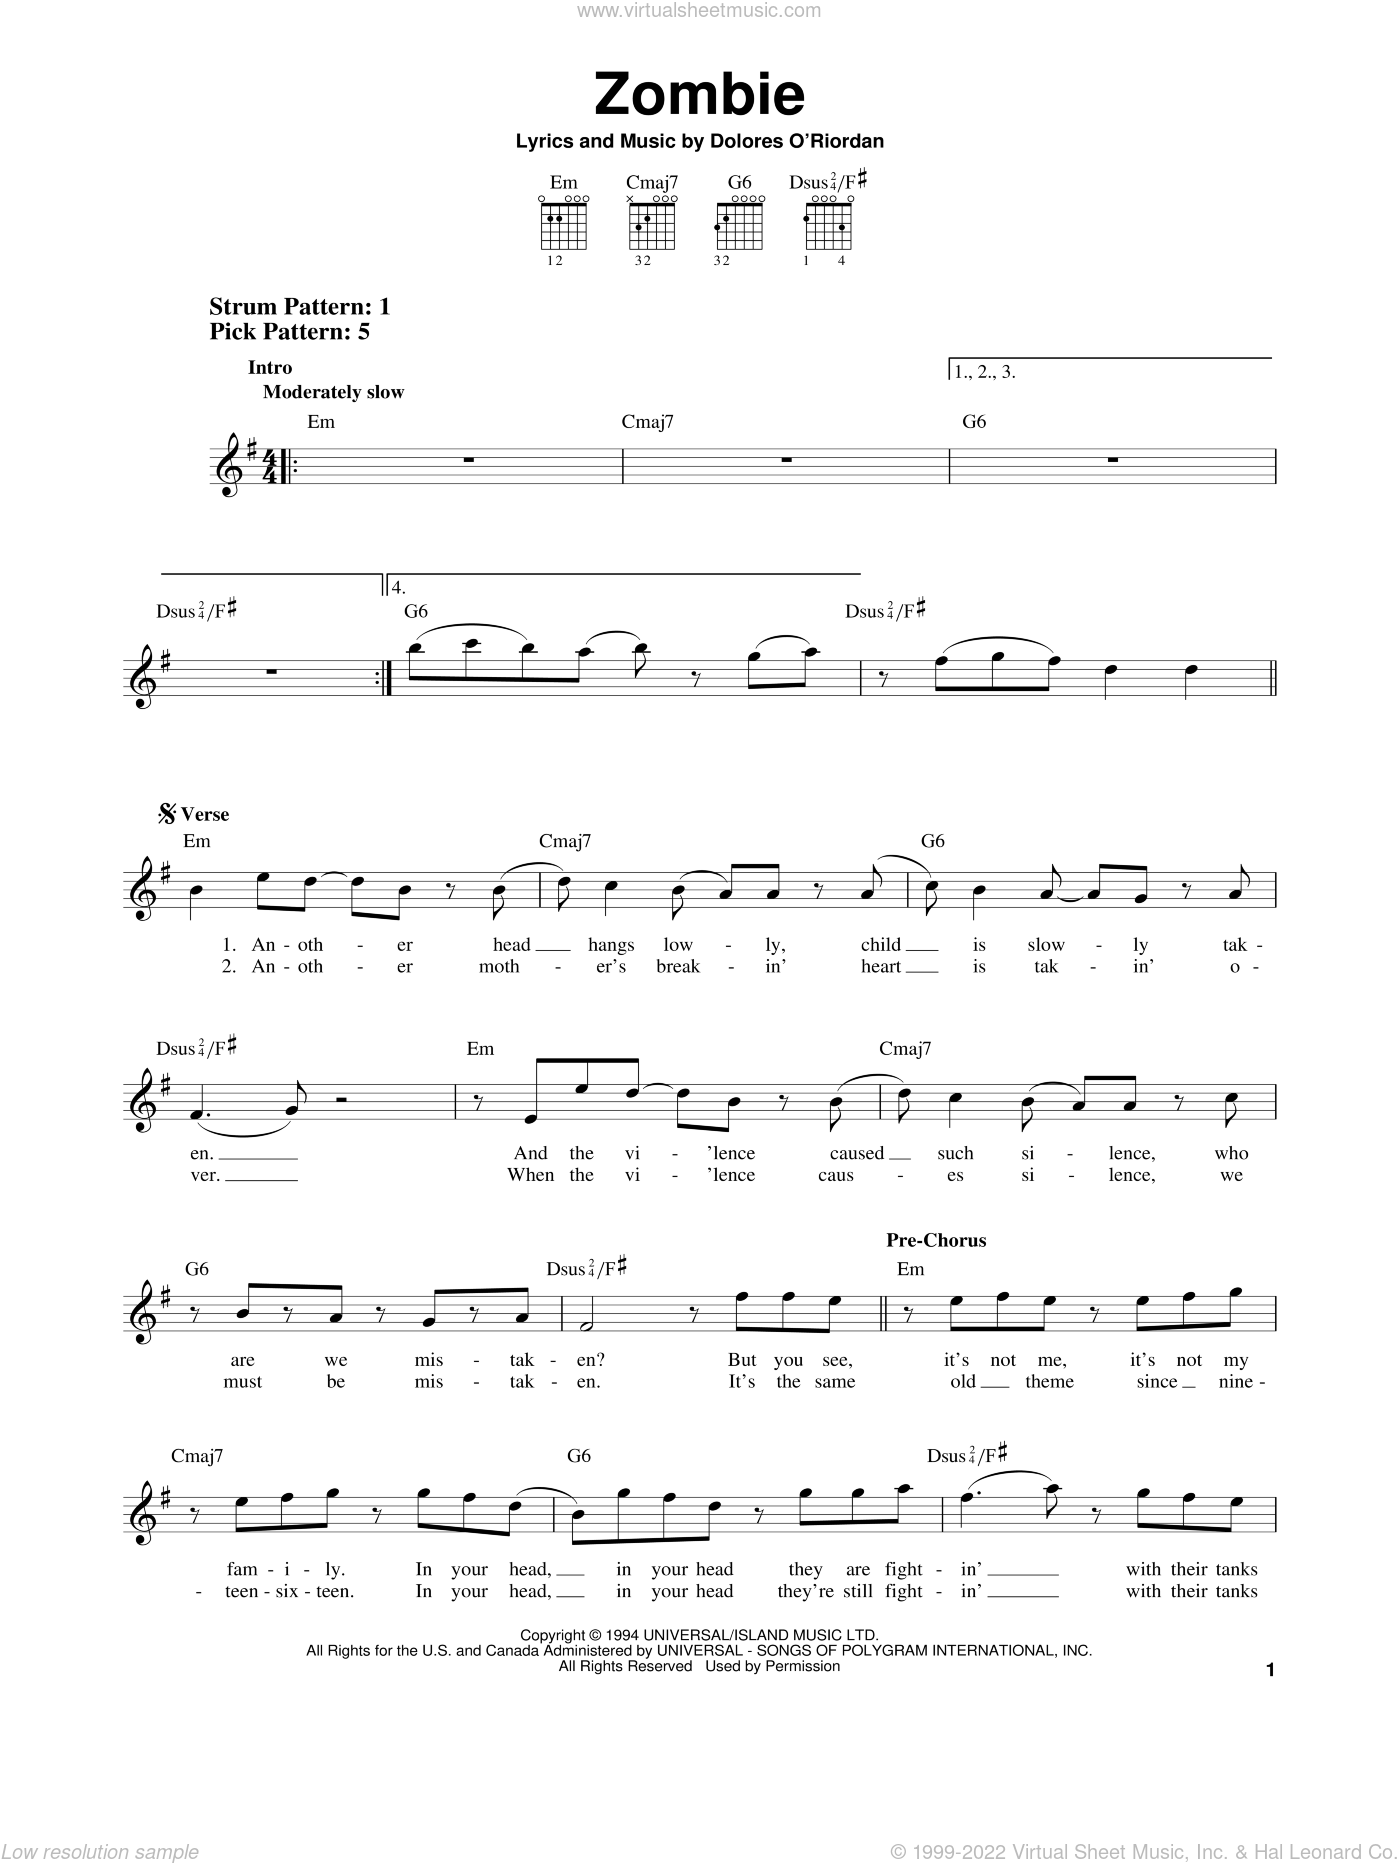 Zombie Sheet Music - 46 Arrangements Available Instantly - Musicnotes